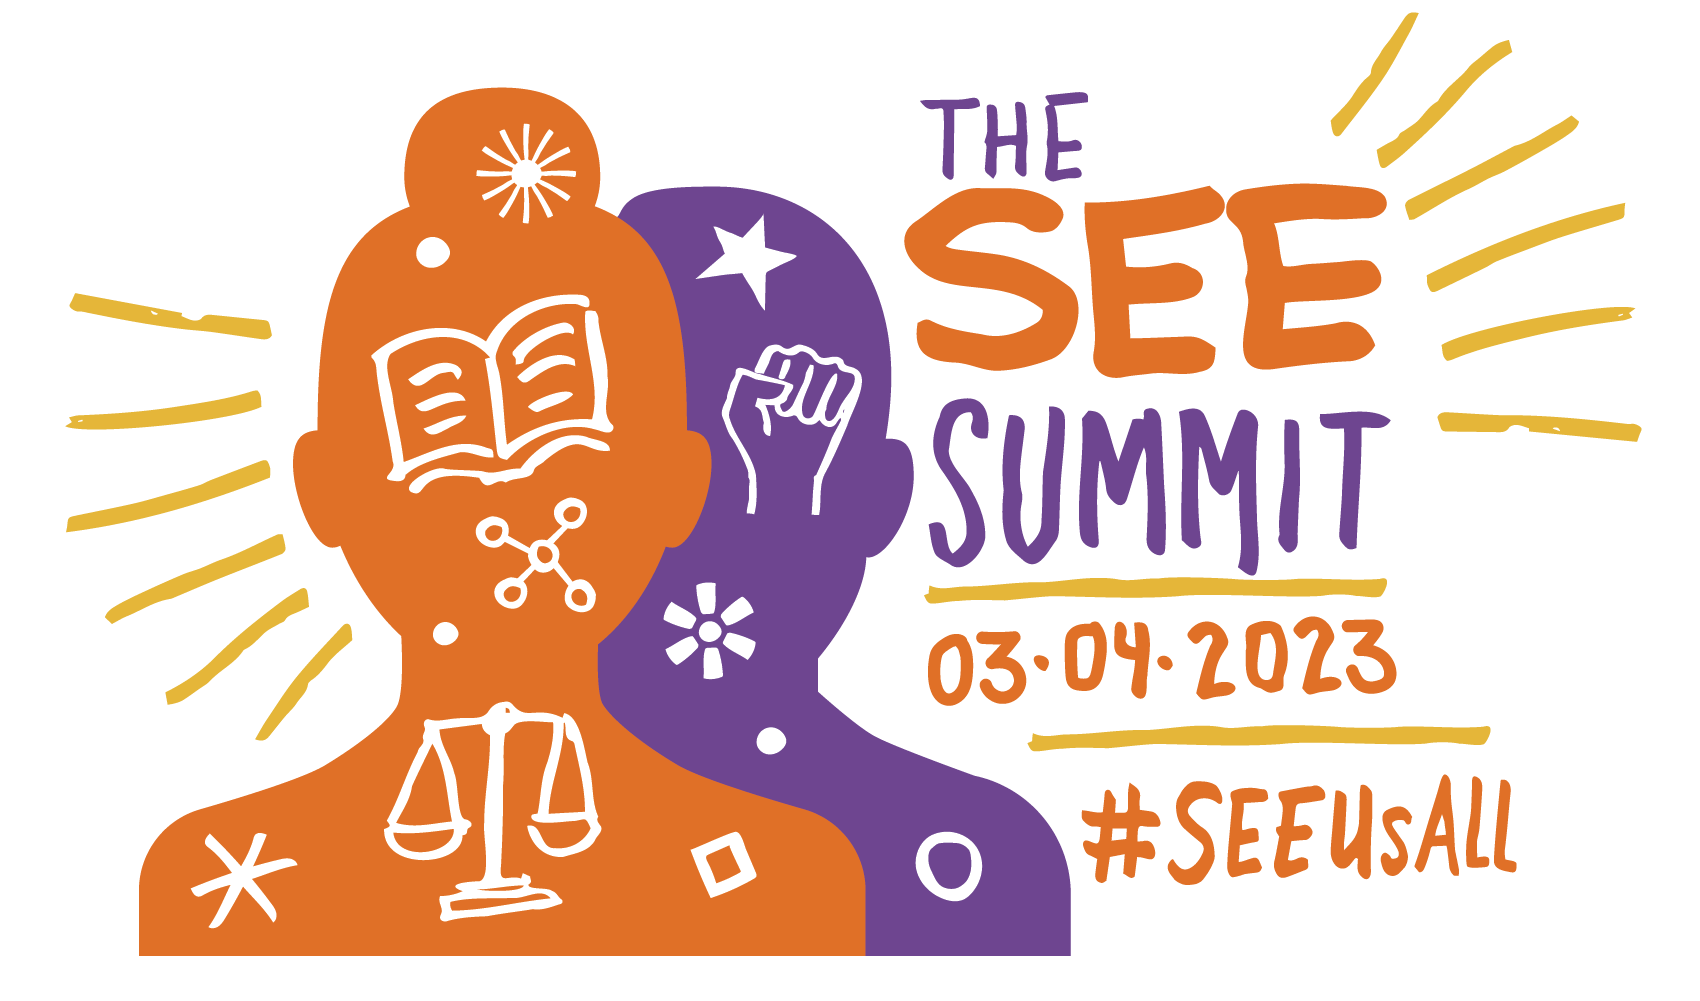 The SEE Summit on March 4, 2023 #SEEUsAll